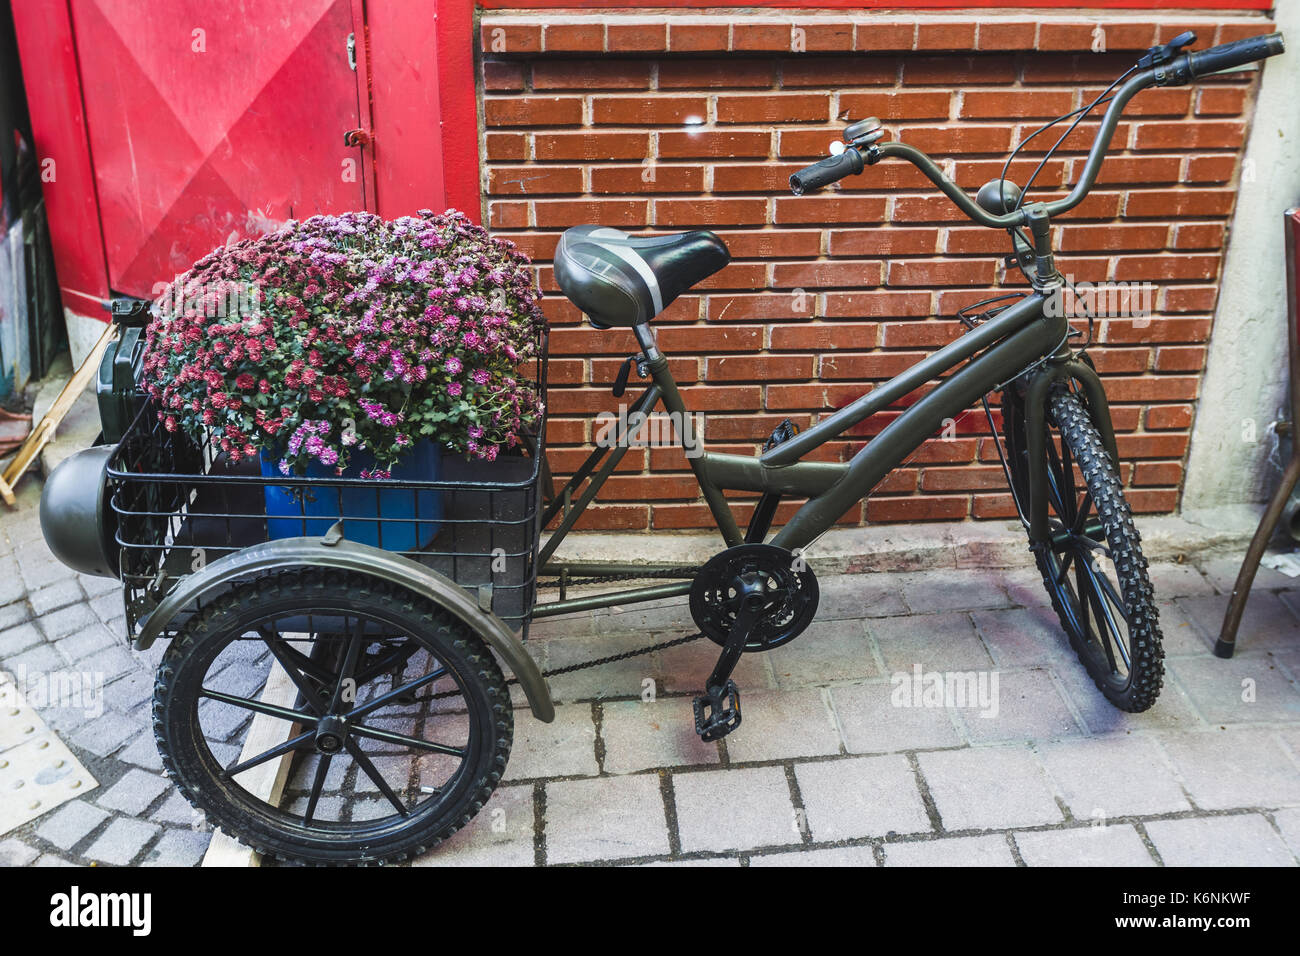 Street decoration with old bicyle and big basket of flowers Stock Photo